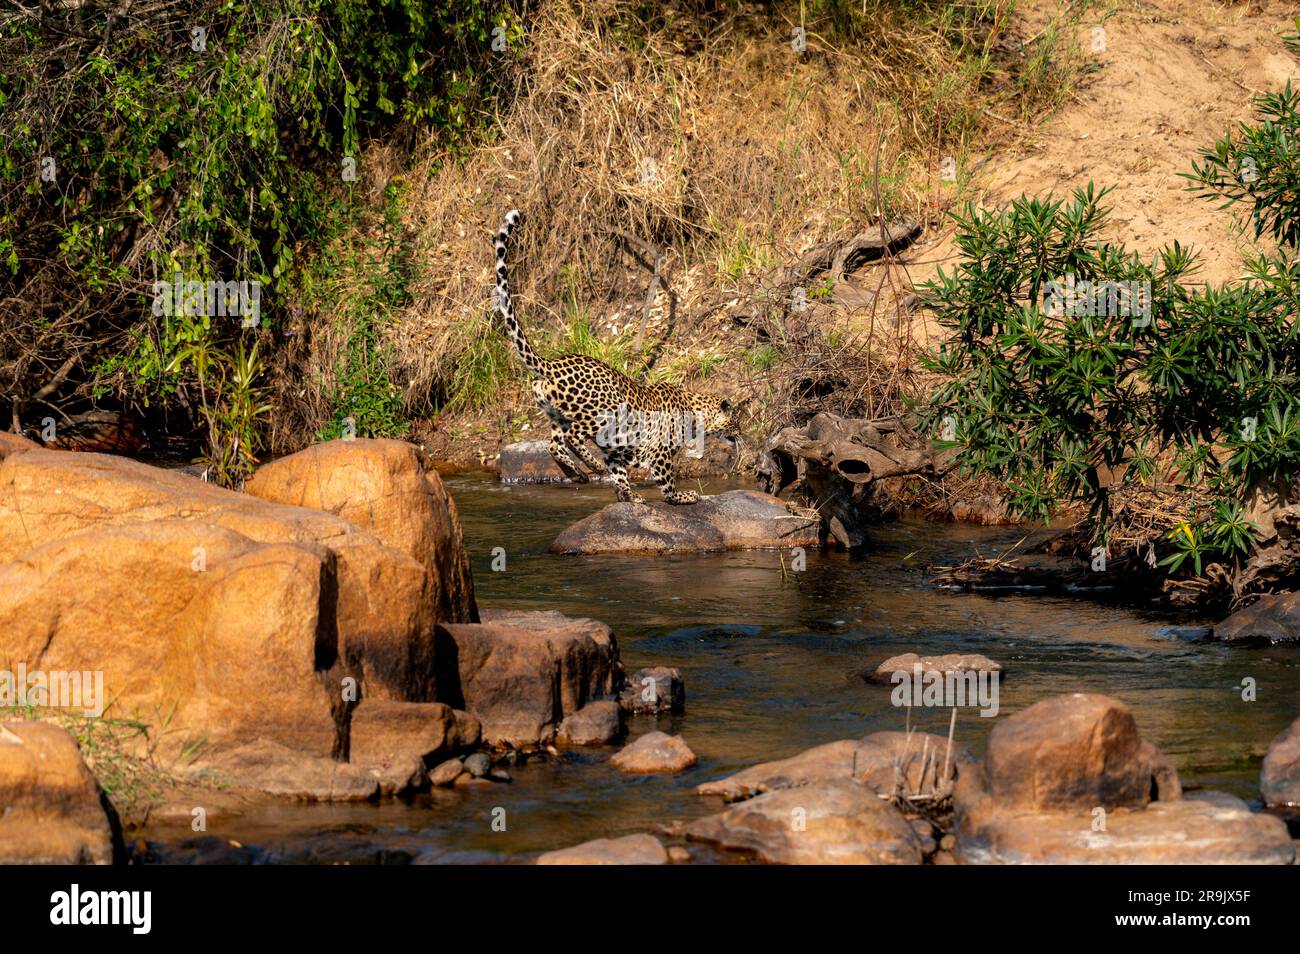 A leopard, Panthera pardus, leaping across a river. Stock Photo